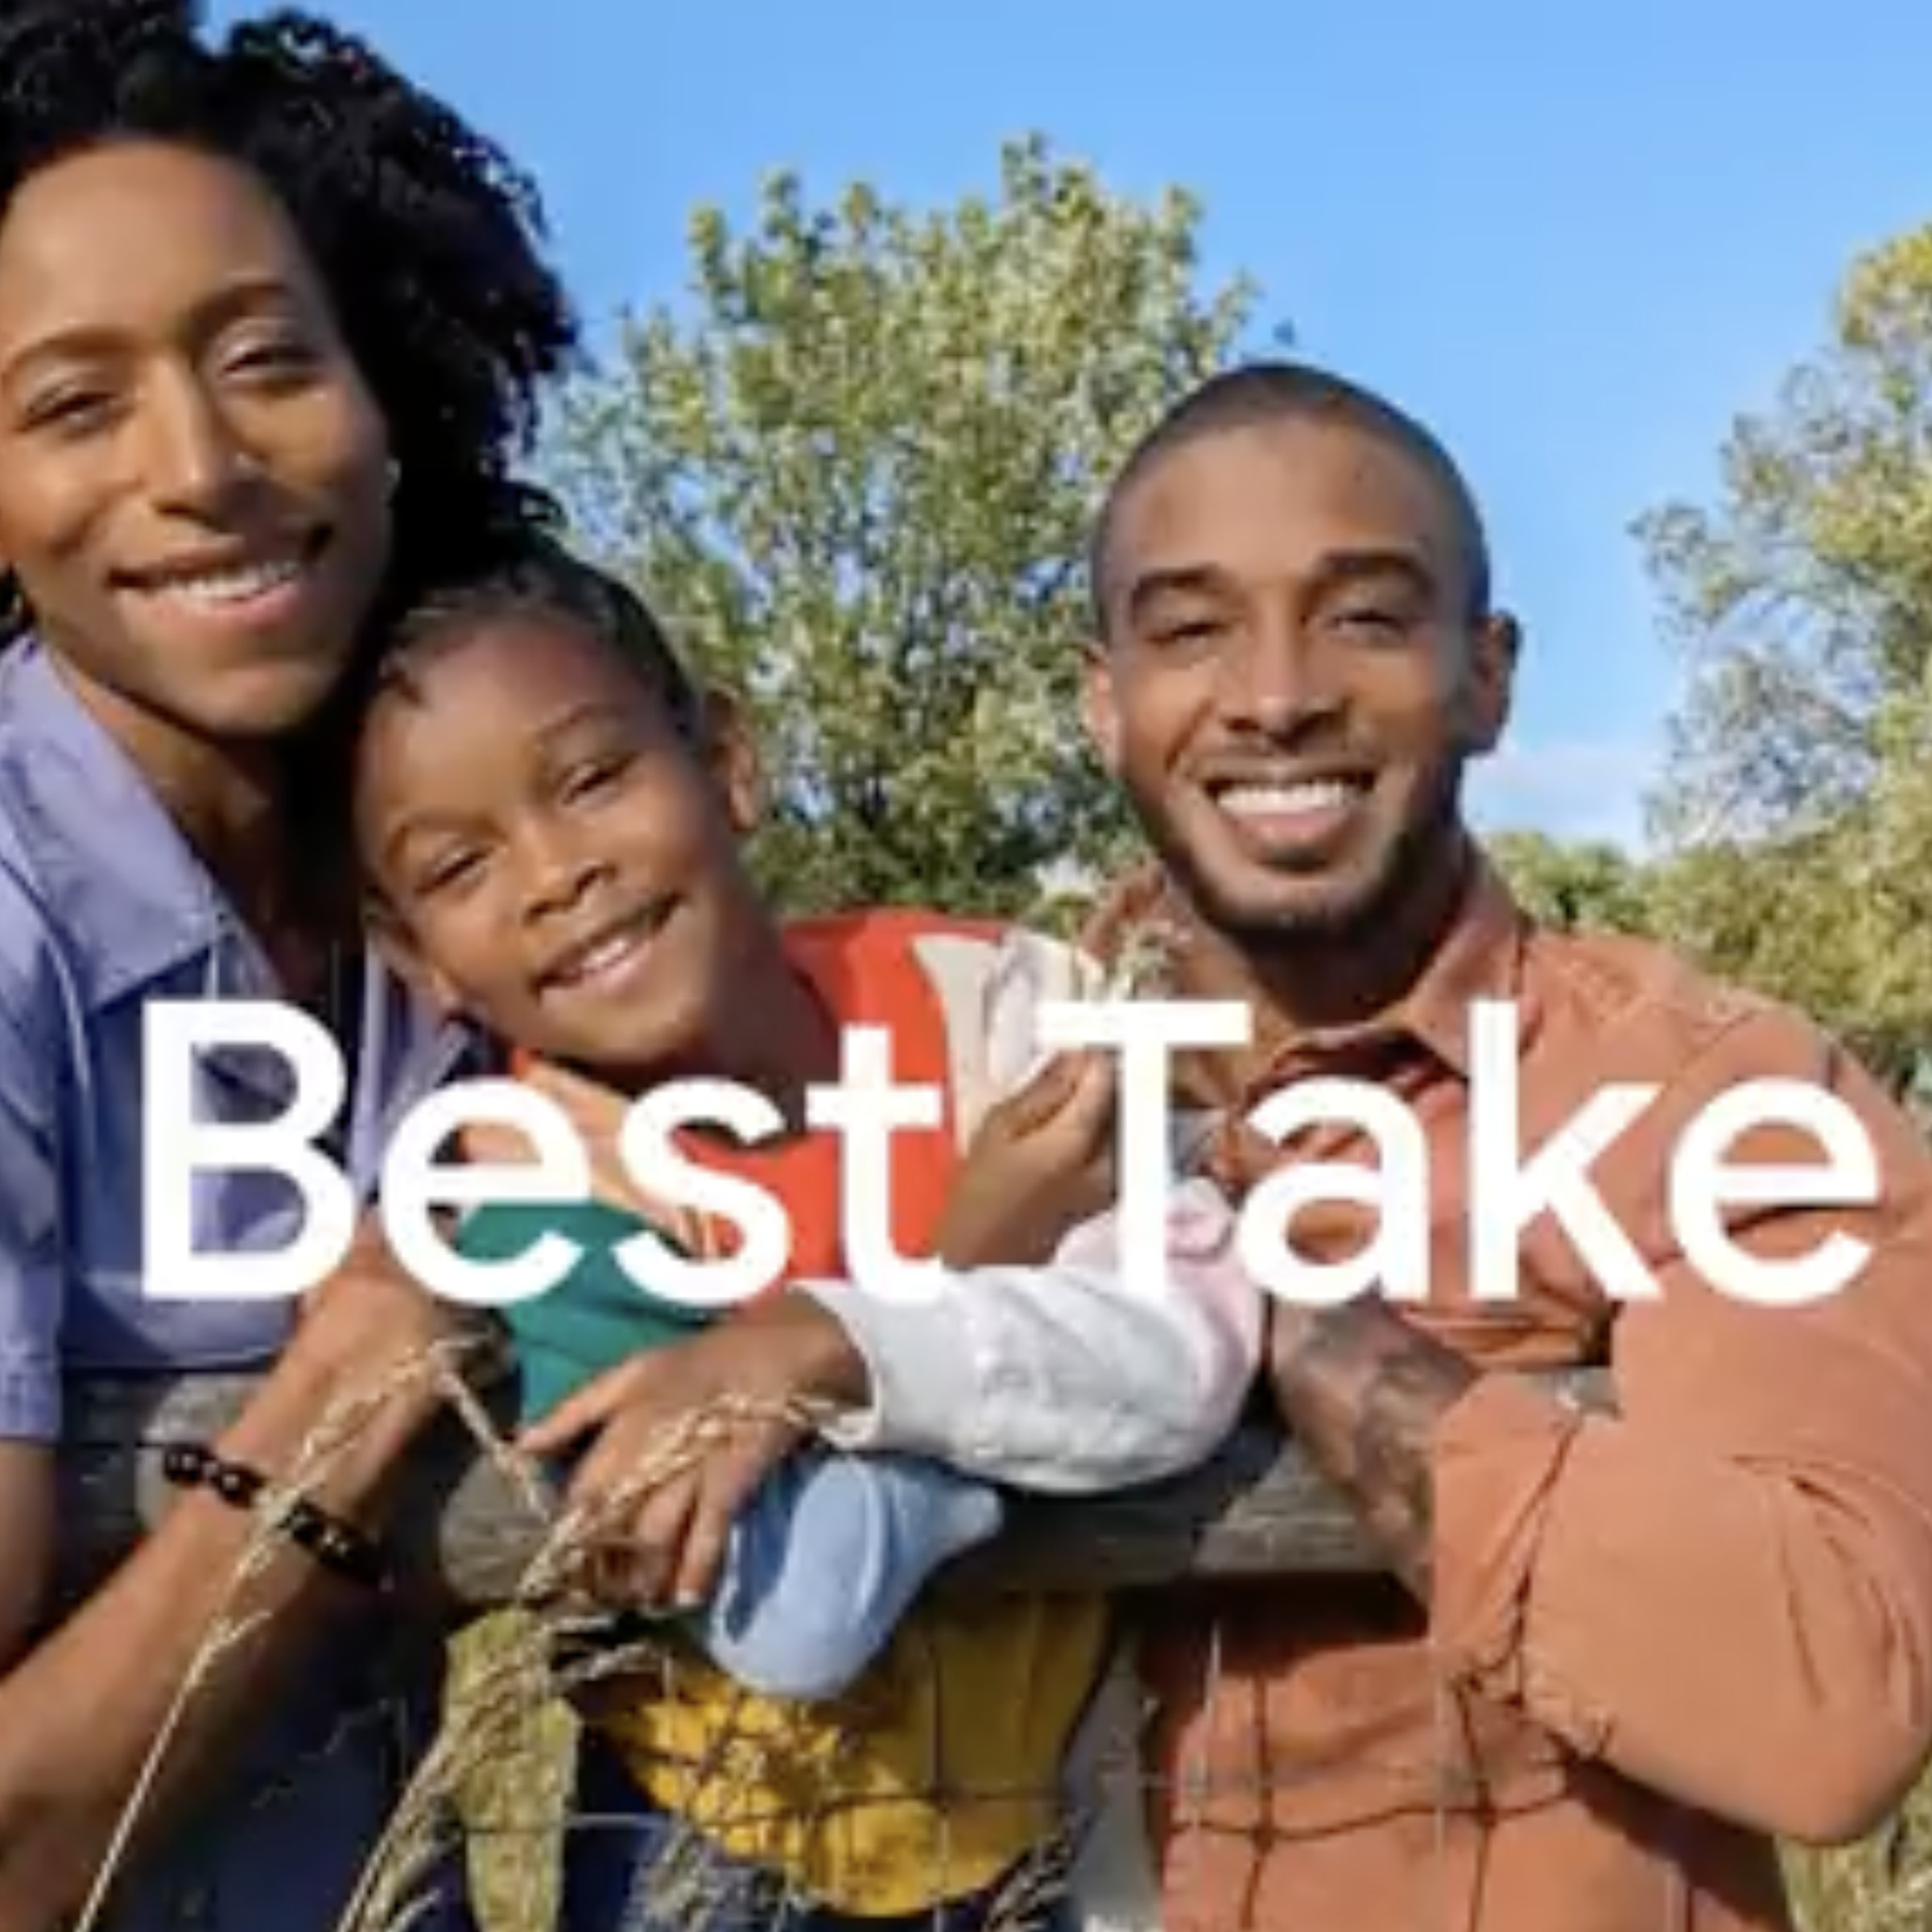 A screenshot of two adults holding a child, all smiling, with the words “Best Take” overlaid on the image.